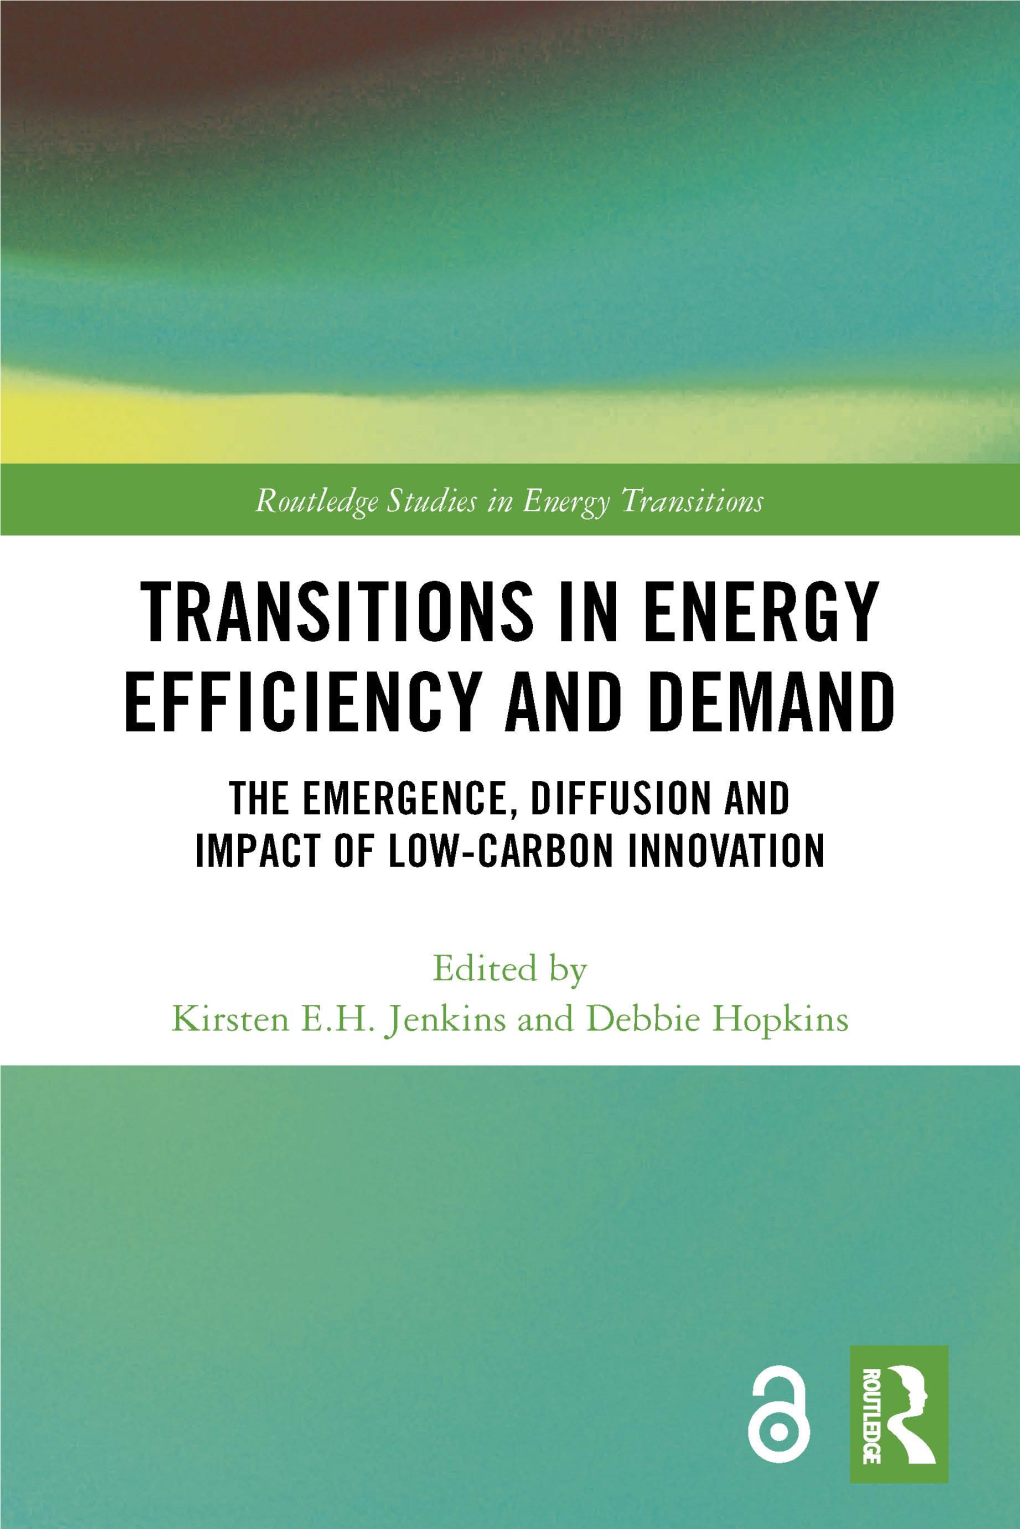 Transitions in Energy Efficiency and Demand Provides an Important Contri- Bution to the Energy Transition Literature, Correcting the Usual Bias Towards Energy Supply